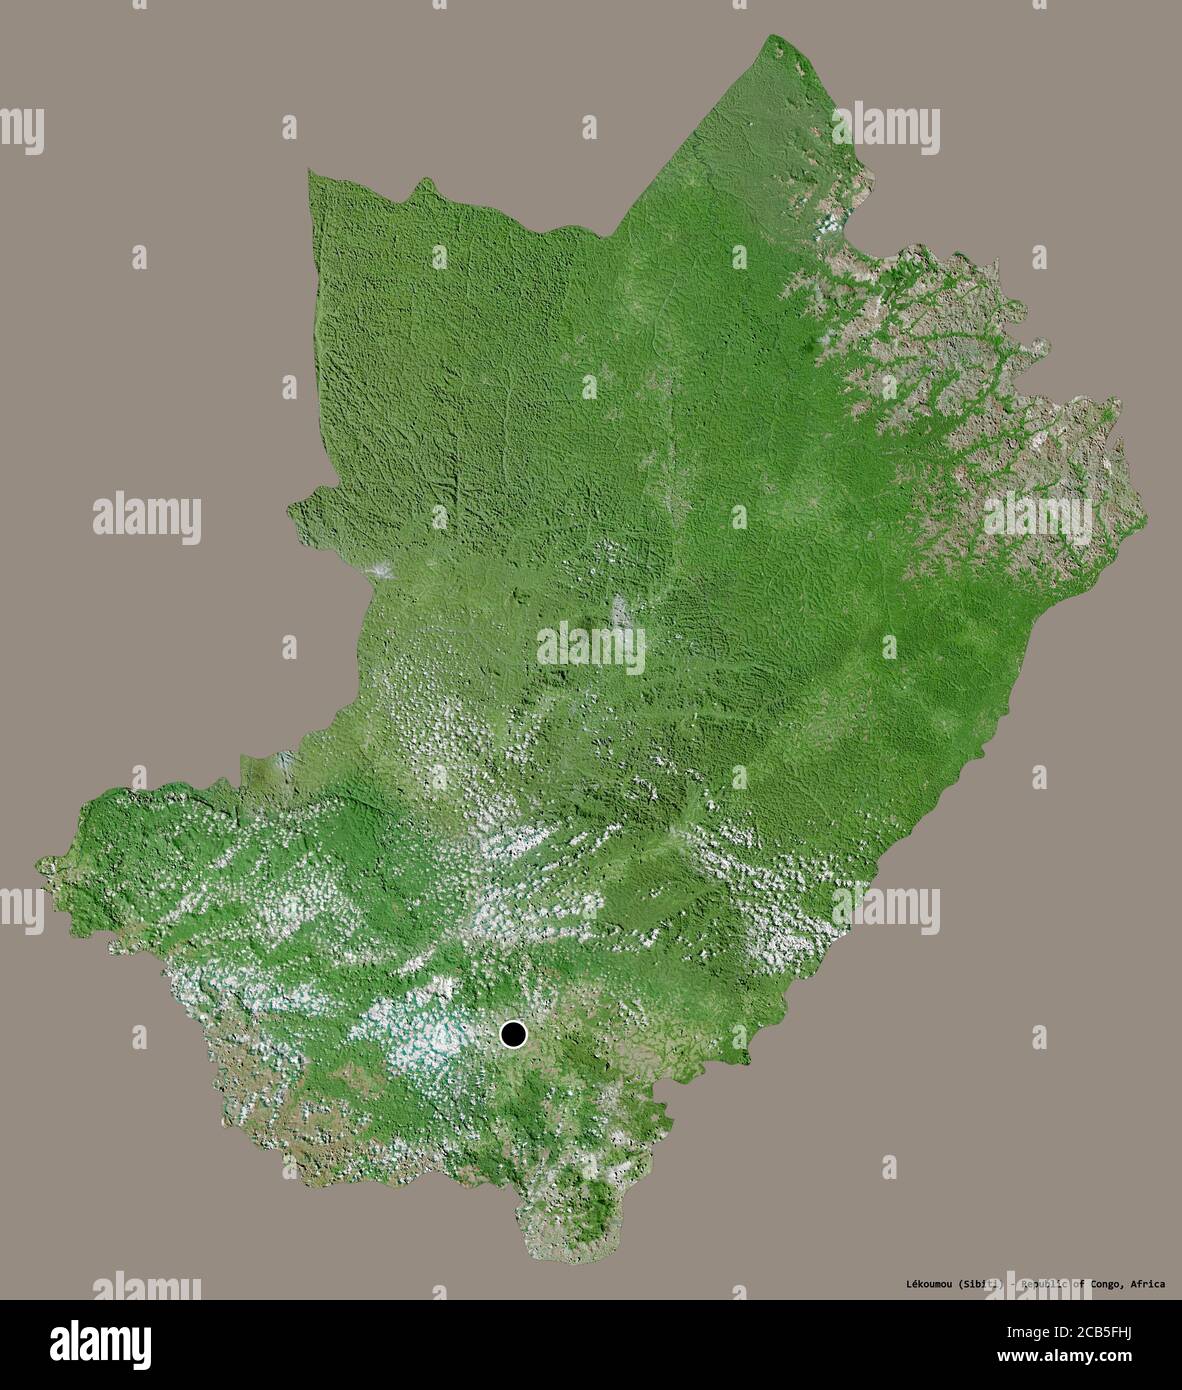 Shape of Lékoumou, region of Republic of Congo, with its capital isolated on a solid color background. Satellite imagery. 3D rendering Stock Photo